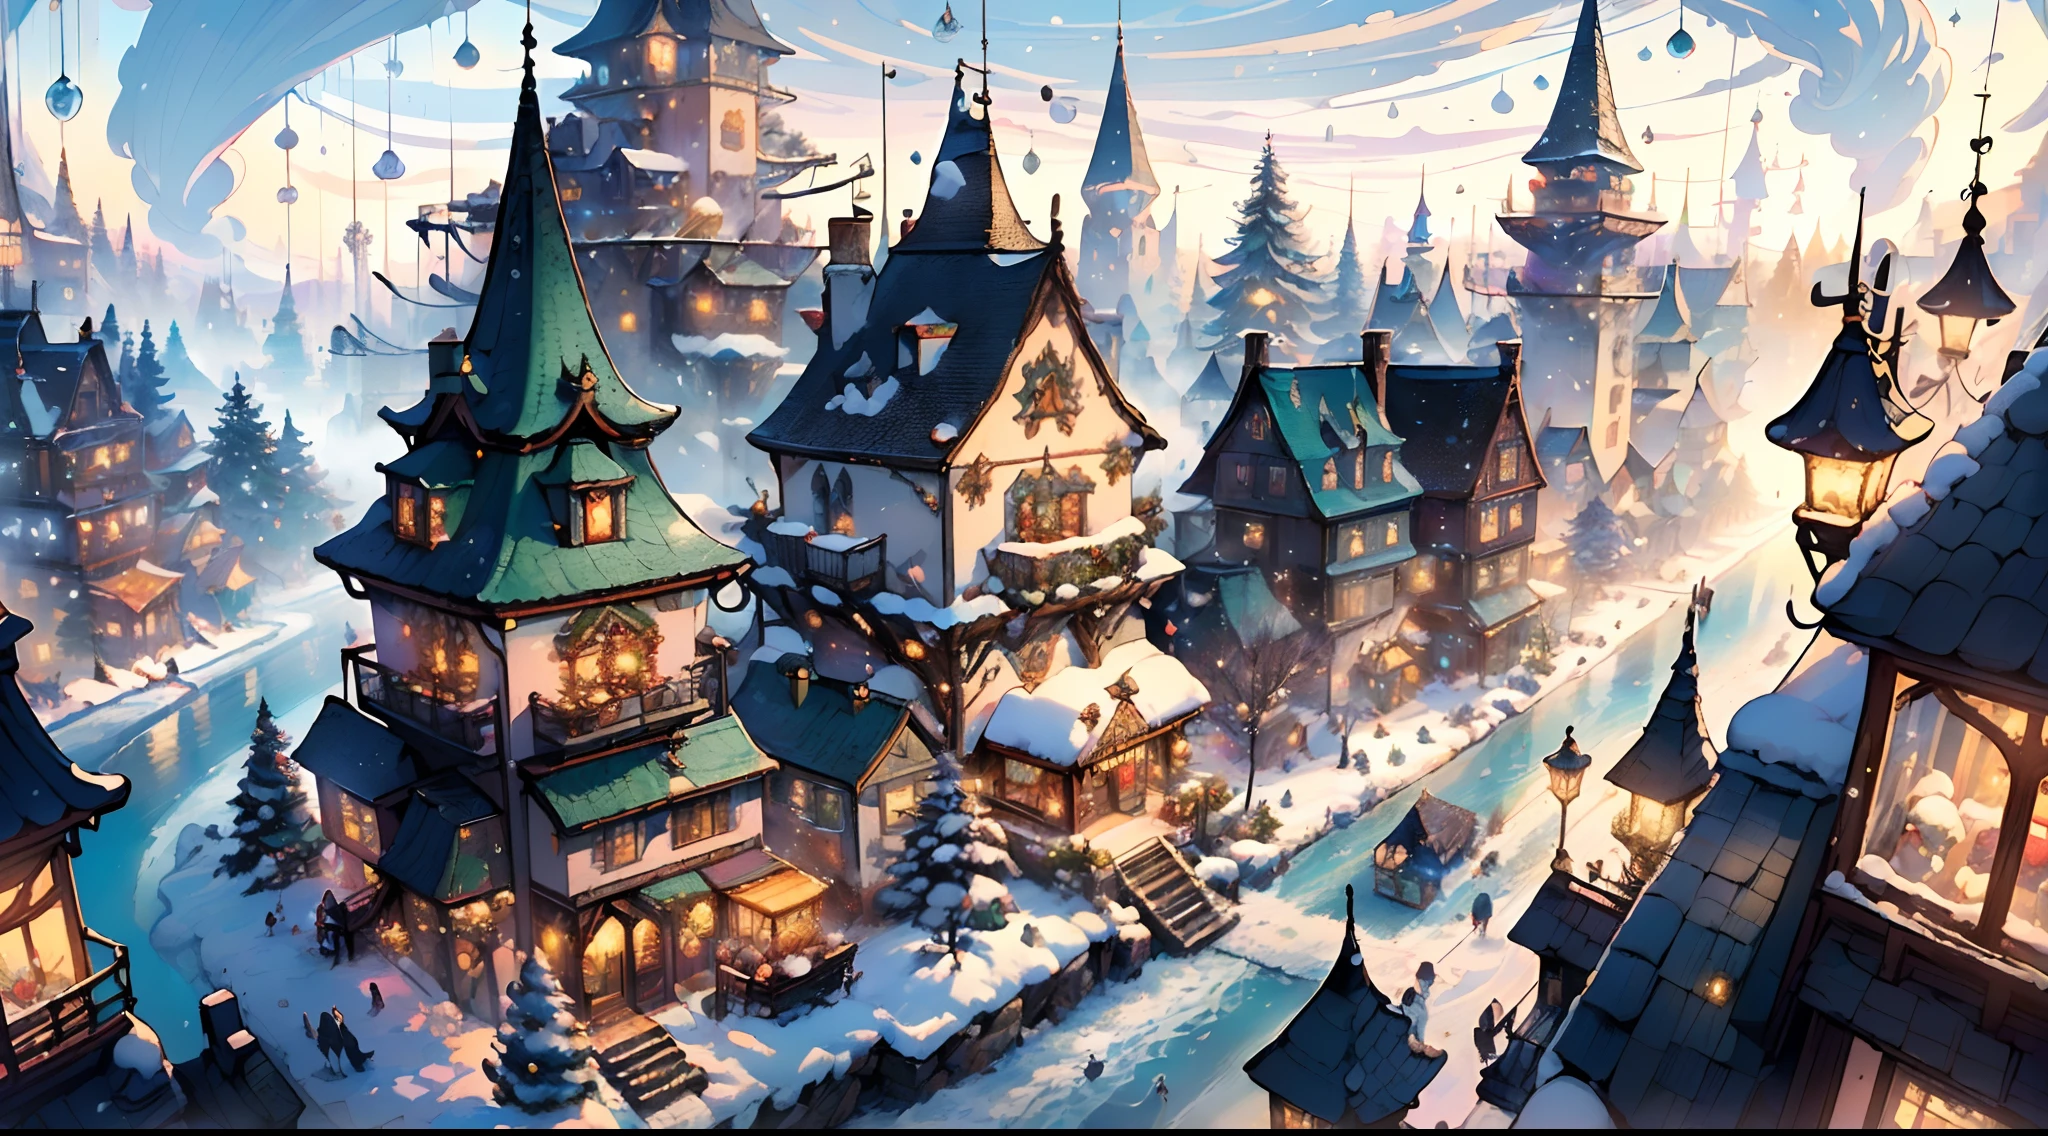 (((masterpiece))),(((high-quality))),(((8K wallpaper))),(((Aerial view of a mega-gigantic winter town decked out in festive decorations))),(((majestic Christmas tree))),(((sparkling lights over the village))),(((star-topped tree))),(((festive village square))),(((snow))),(((snow-covered scene))),(((winter wonderland))),(((snowflakes))),(((cottages and houses))),(((frozen rivers))),(((captivating descent  into this winter haven))),(((camera view from above))),(((breathtaking scenery))),(((vivid landscapes))),(((mesmerizing views that capture the holiday spirit))),(((captivating beauty of the season's enchantment))),(((enchanting panorama of the village's winter charm))),(((startling colors in the festive decorations))),(((transcendent experience of a holiday dream come true))),(((unreal journey into a winter paradise))),(((surreal surroundings where joy and snow intertwine))),(((captivating landscapes))),(((mind-blowing views of a winter fantasy))),(((stunning imagery))) adorned with holiday magic,(((dreamlike perspective where reality sparkles))),(((captivating enchantment))),(((spectacular freefall of snowflakes from the sky))), Fantasy art Style, Best Quality, Ultra Detailed, landscape dressed in winter's finest,(((Snowy forest))), breathtaking winter scene,(((best quality))),(((high resolution))),(((sharp focus))),(((ultra detailed))),(((extremely detailed))),(((extremely high quality artwork))),(((8k wallpaper))),(((extremely detailed CG 8k))),(((very fine 8K CG))),((hyper super ultra detailed perfect piece)),(((flawless))),(((illustration))),(((dynamic lighting))),(((dynamic light))),(((festive light))),(((holiday glow))),(((cinematic shadow))),(((textile shading))),(((vivid colors))),(((Frosty Cathedral))),(((Glowing Reindeer))),(((Twinkling Snowflakes))),(((Chimneys with Smoke))),(((glowing windows))),(((festive wreaths))),(((Ice Skating Rink))),(((Illuminated Sleigh))),(((Roof of the World))),(((intricate))),(((ornate))),StackedCityAI.